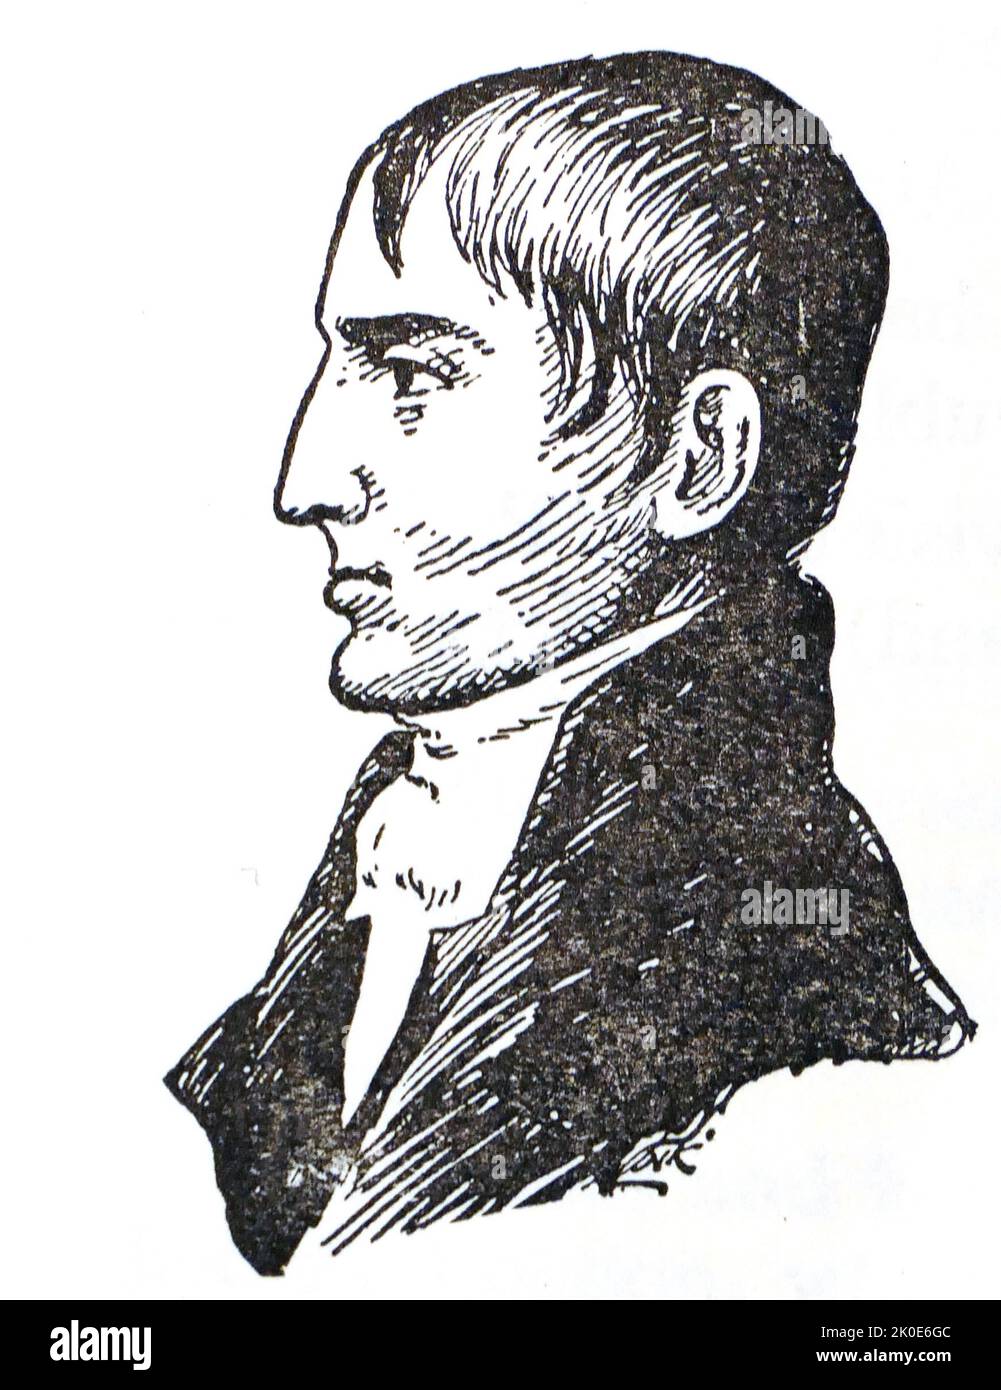 Robert Emmet (1778 - 1803) was an Irish Republican, orator and rebel leader. Following the suppression of the United Irish uprising in 1798, he sought to organise a renewed attempt to overthrow the British Crown and Protestant Ascendancy in Ireland, and to establish a national representative government. Stock Photo